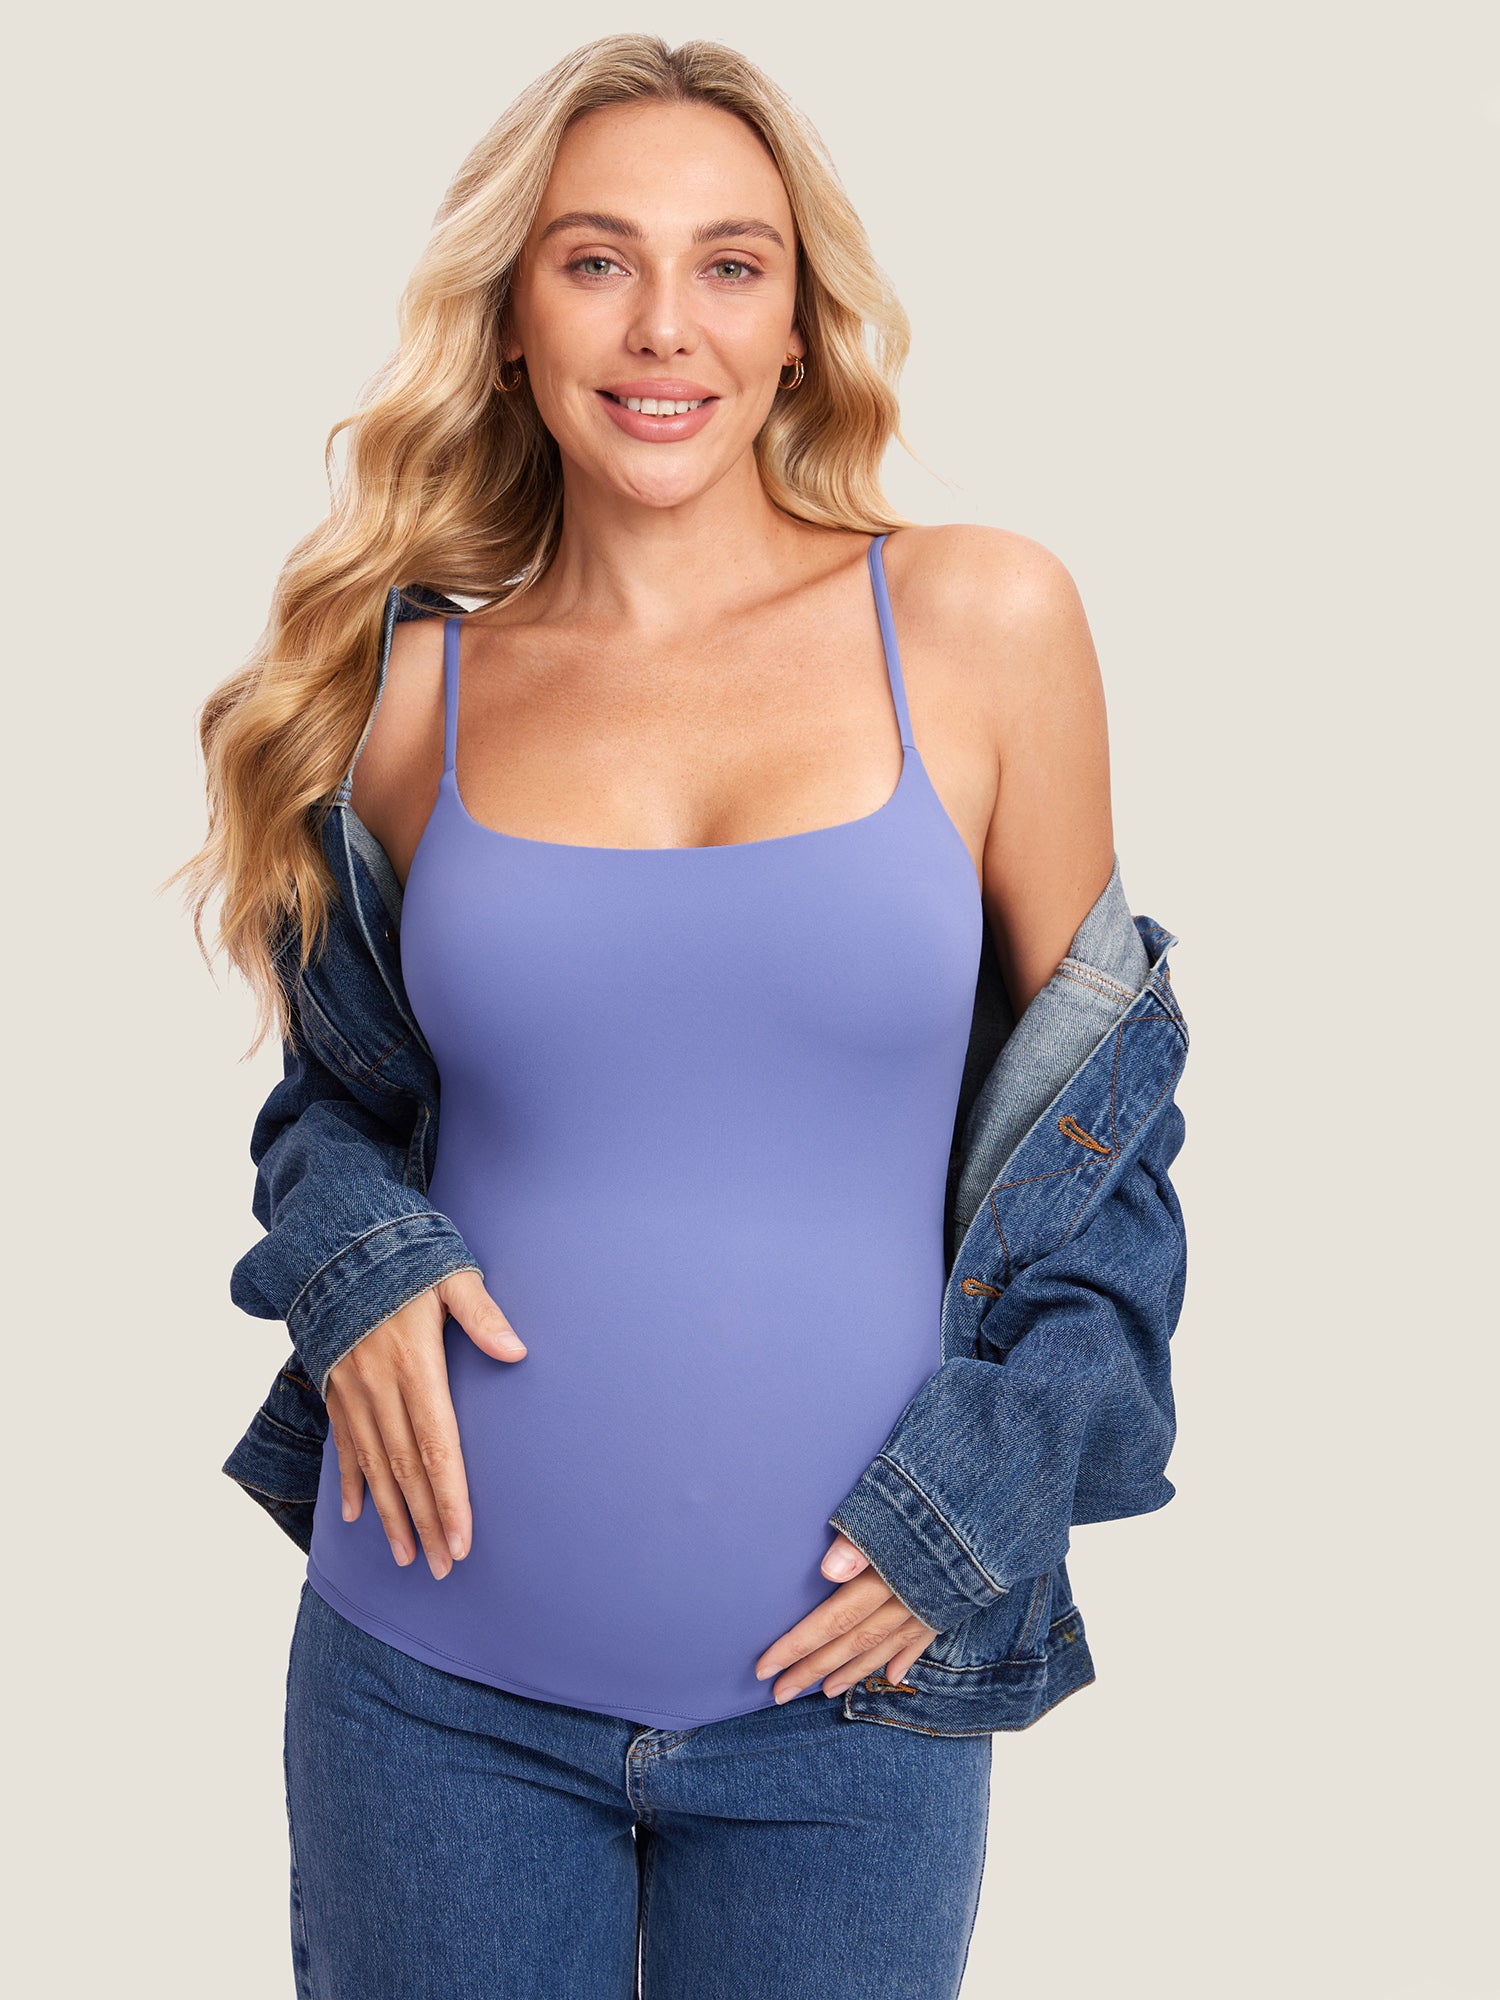 Inbarely® Maternity Camisole Tank Top Persian Blue